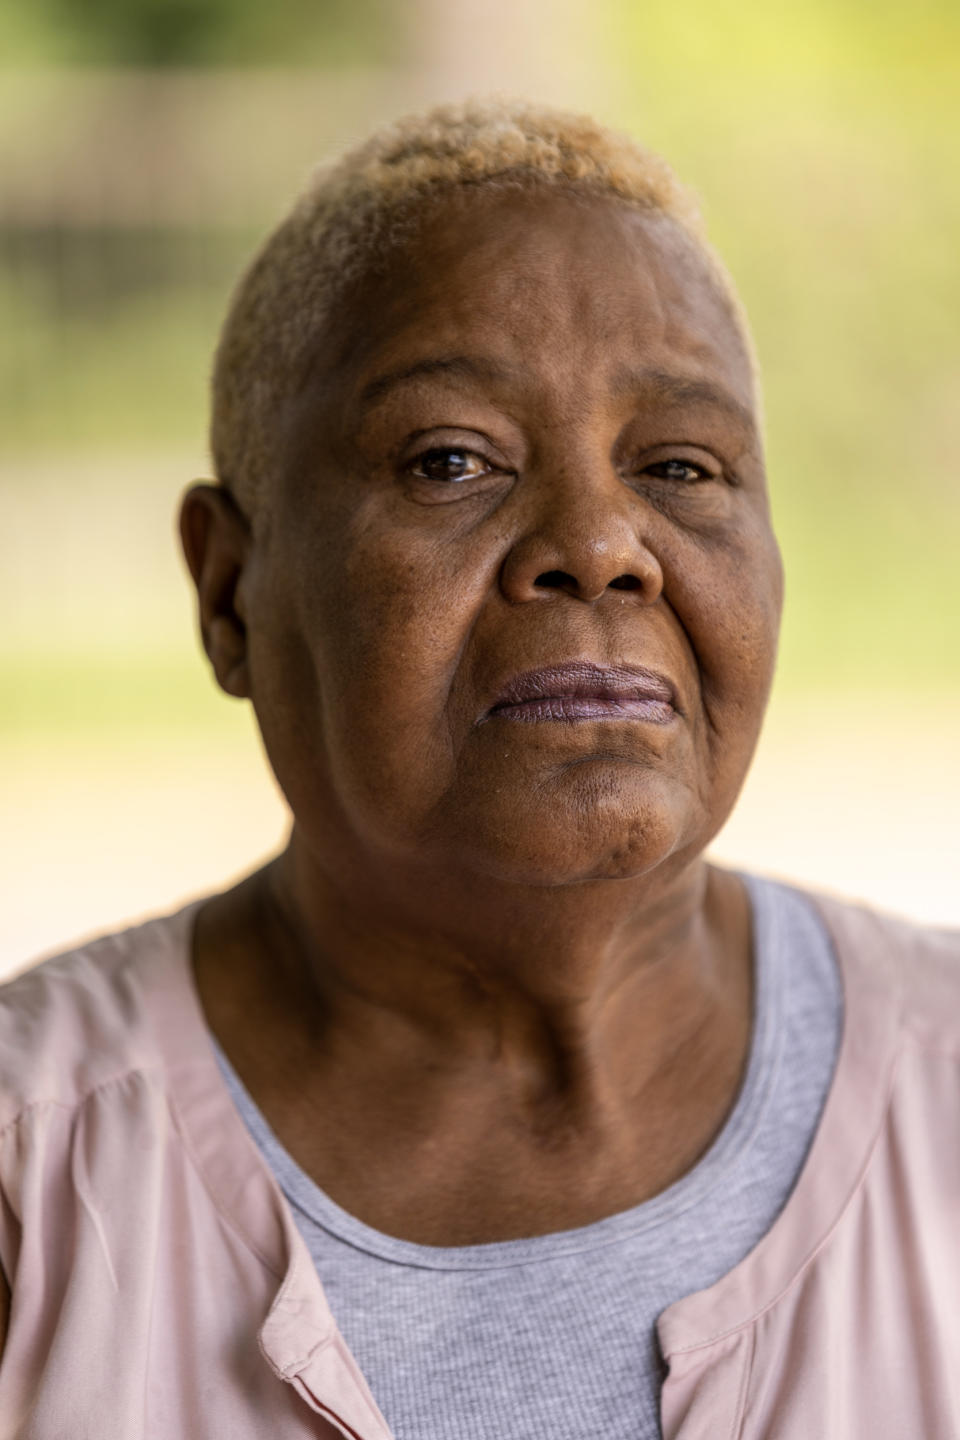 Bettie Ewing lives at the Emerald Pines apartment complex in Gulfport, Miss. (L. Kasimu Harris for NBC News)